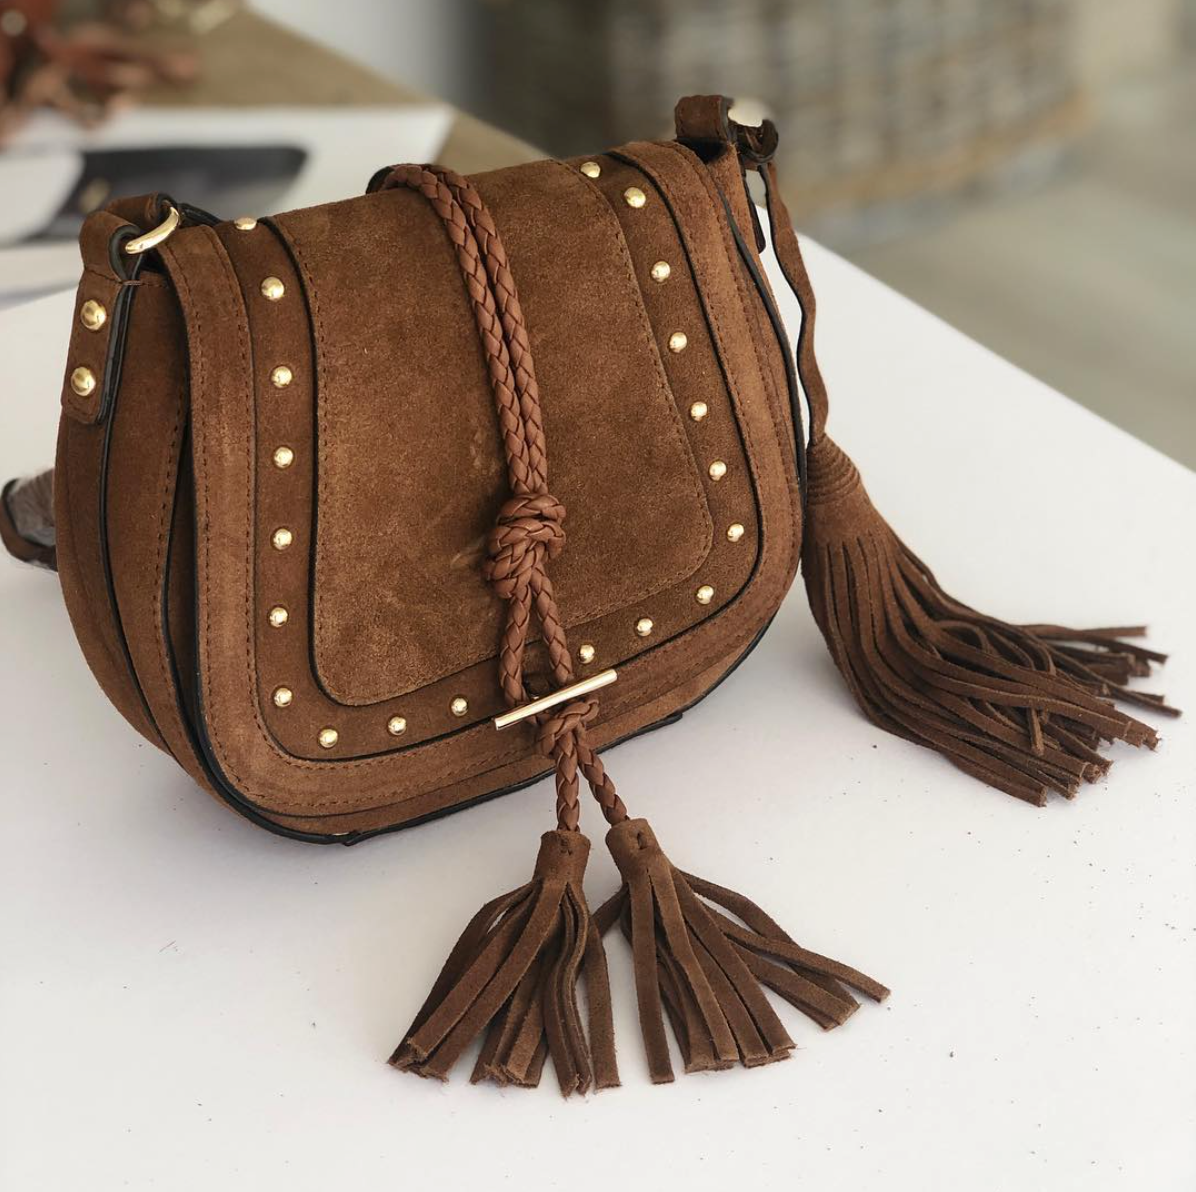 Rodeo Ready Accessories. Saddle bags for the Modern Cowgirl